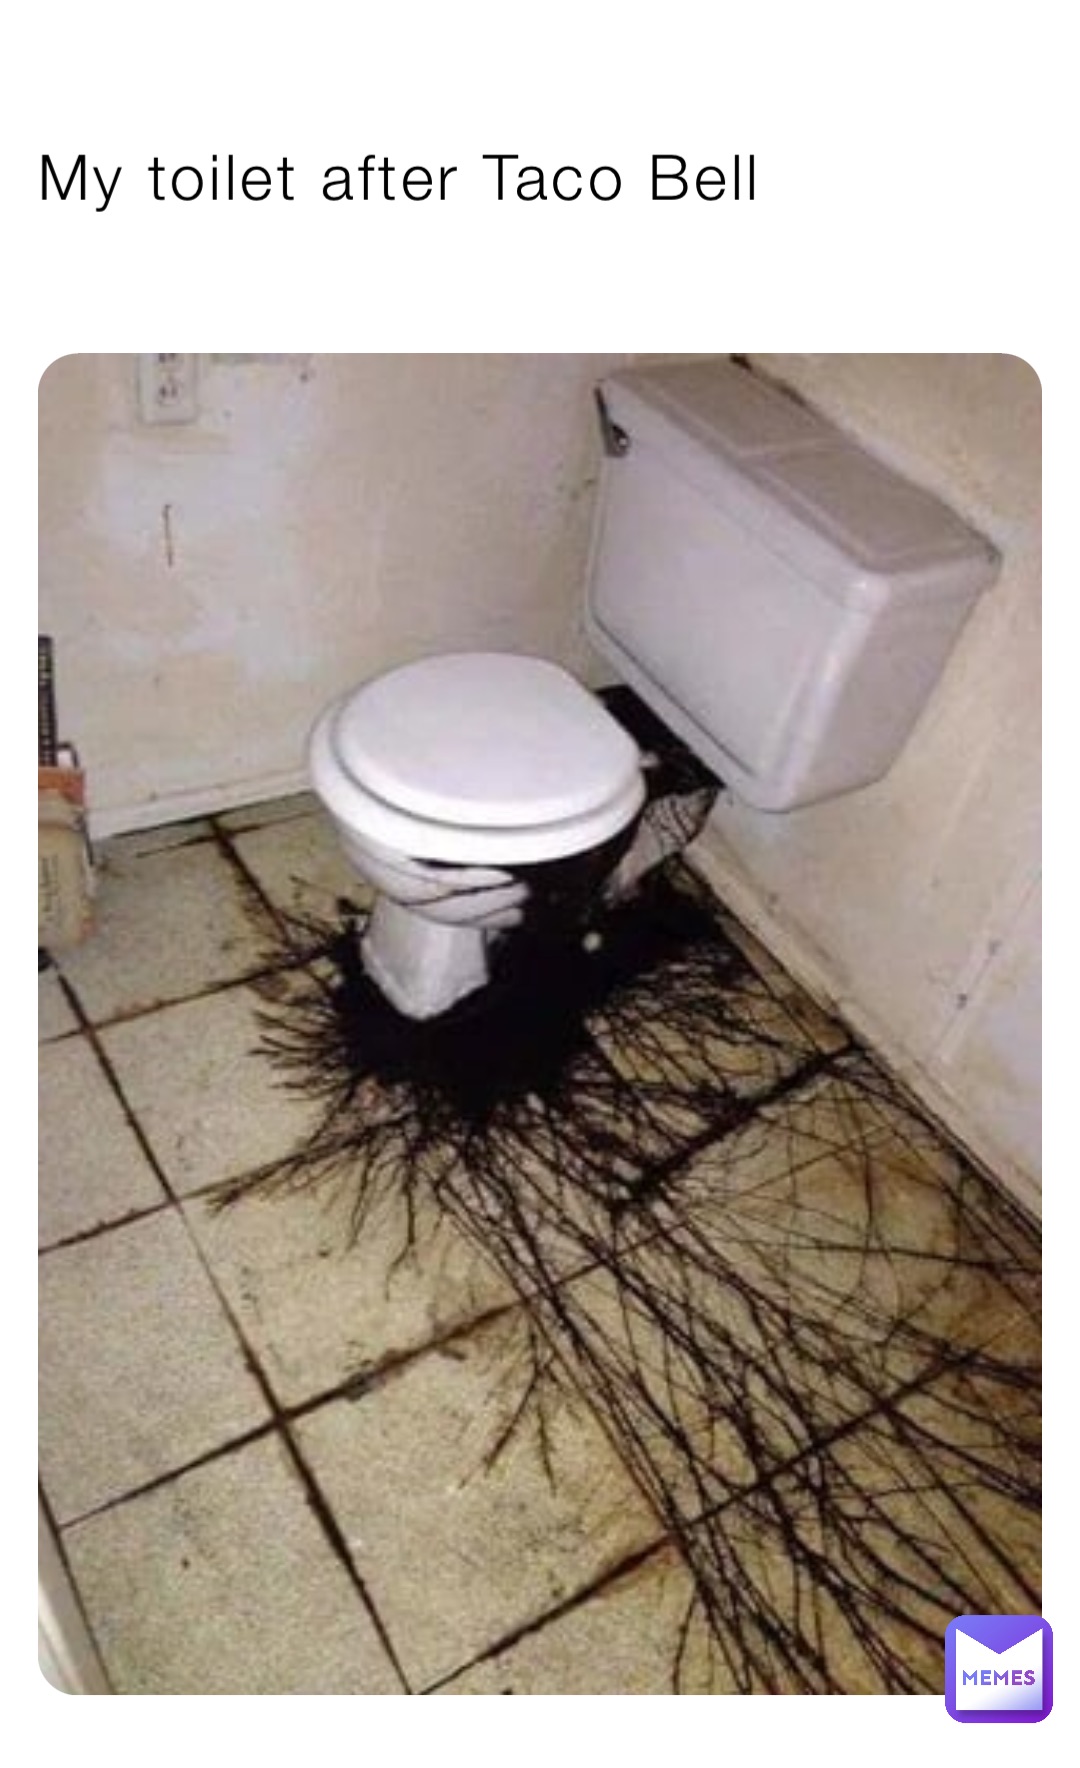 My toilet after Taco Bell